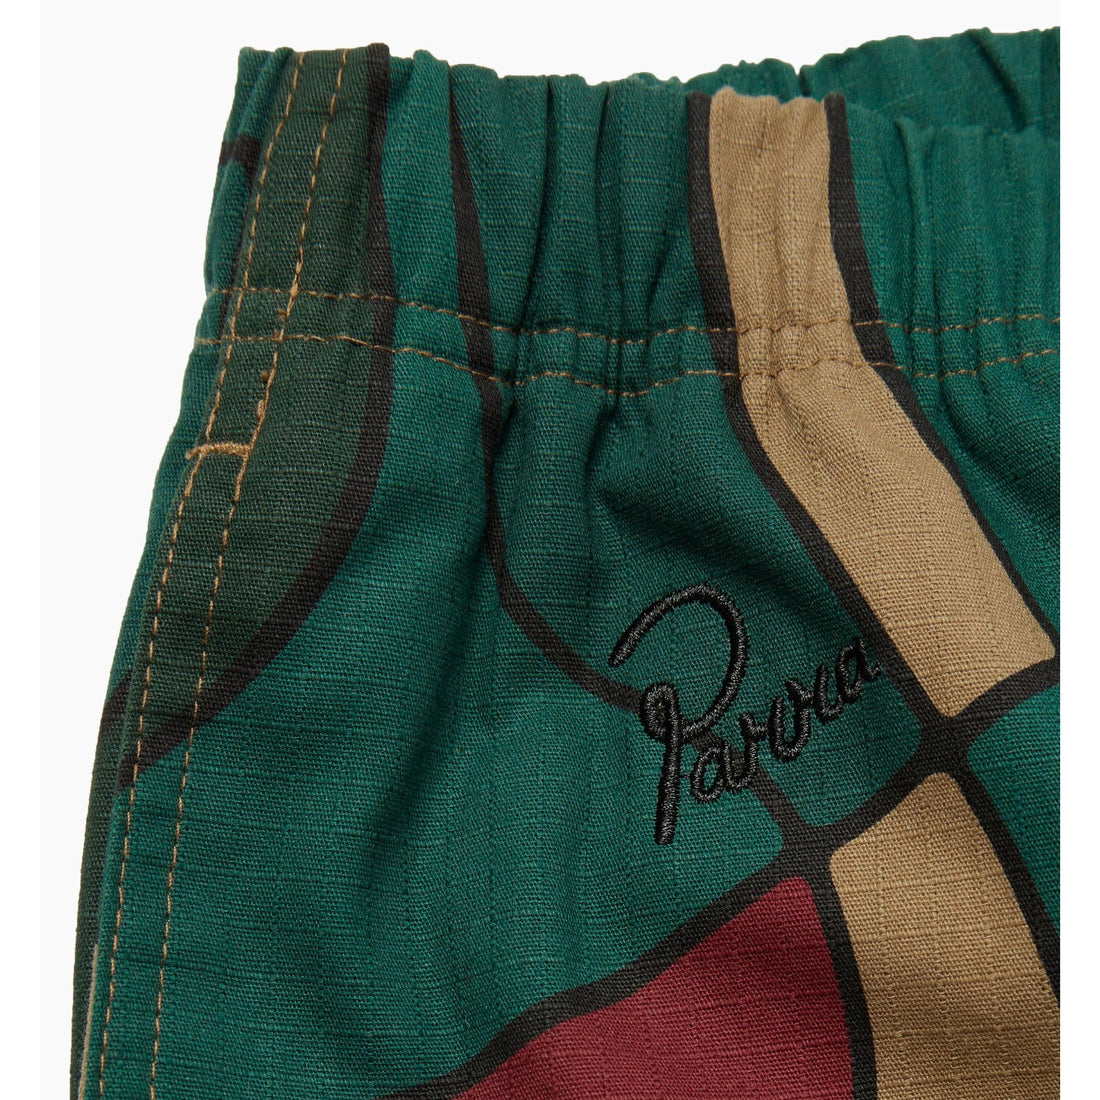 BY PARRA - TREES IN THE WIND RELAXED PANTS - CAMO GREEN